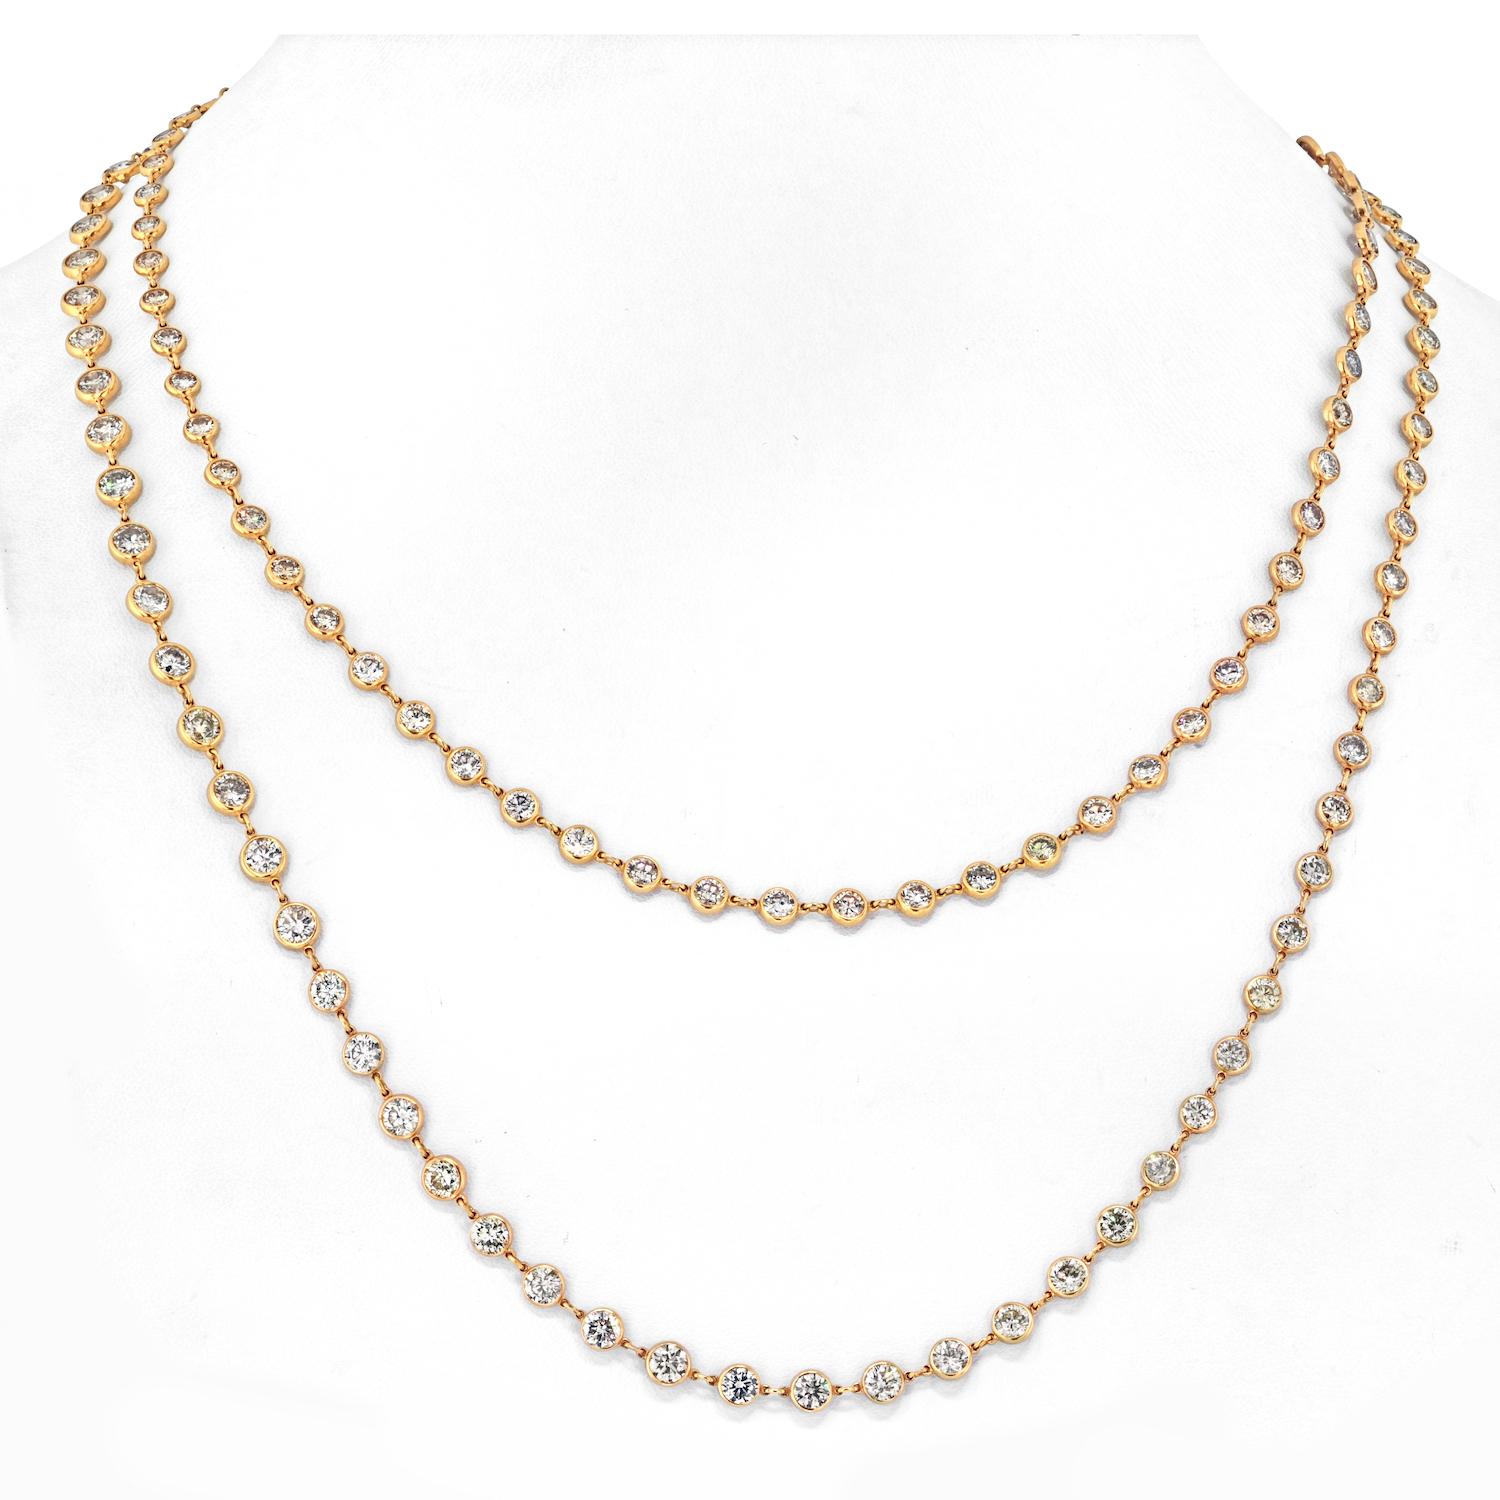 34 cttw 18K Yellow Gold Round Diamond By The Yard 43 Inches Chain Necklace For Sale